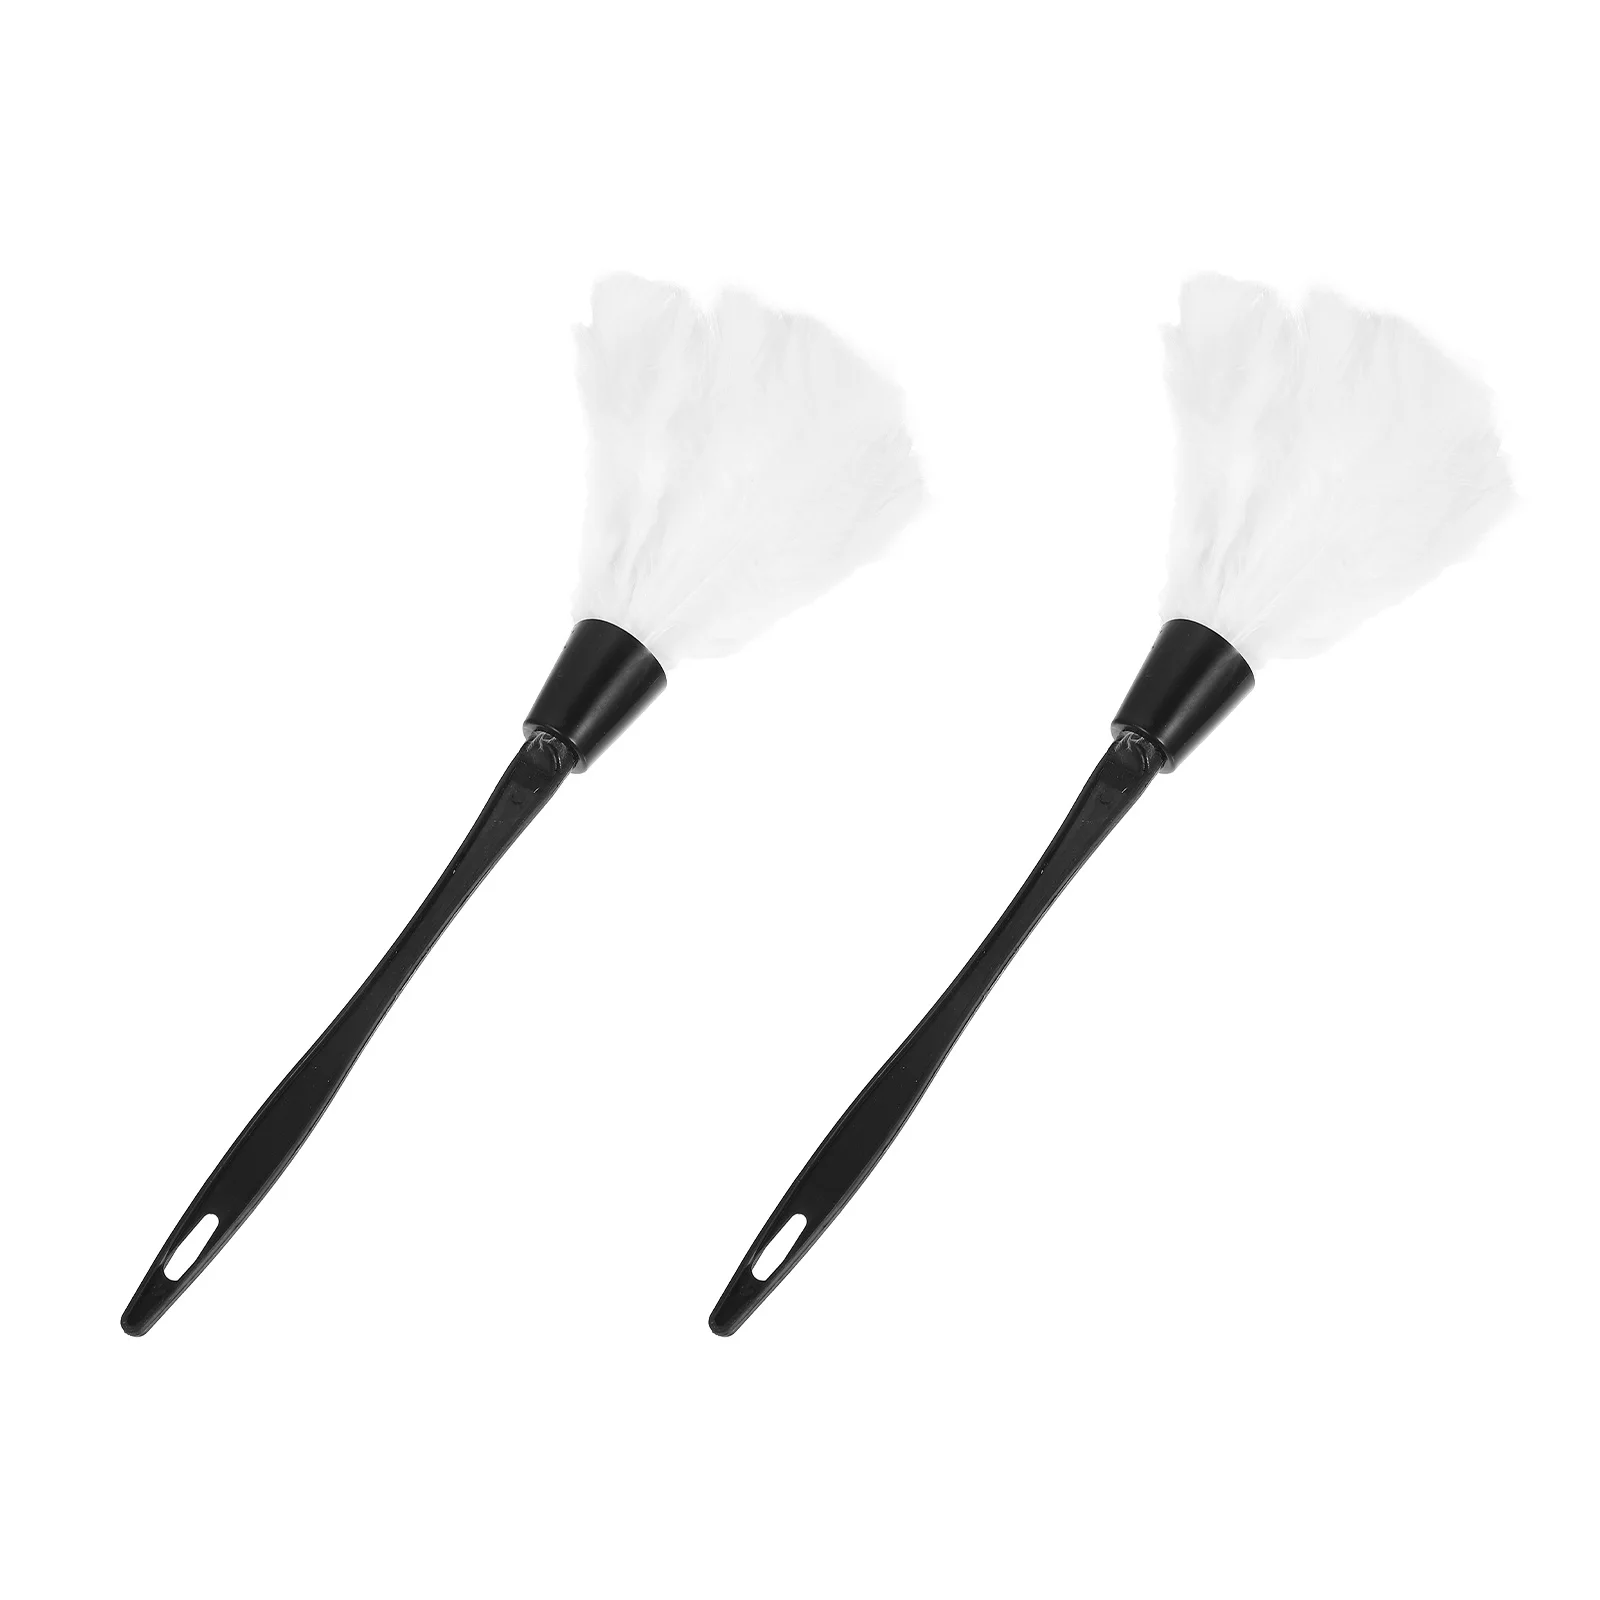 

Duster Maidprop Partybrush Plume Costume Cleaning French Broom Feathered Hand Turkey Dusters Cosplay Miniature Car Dusting